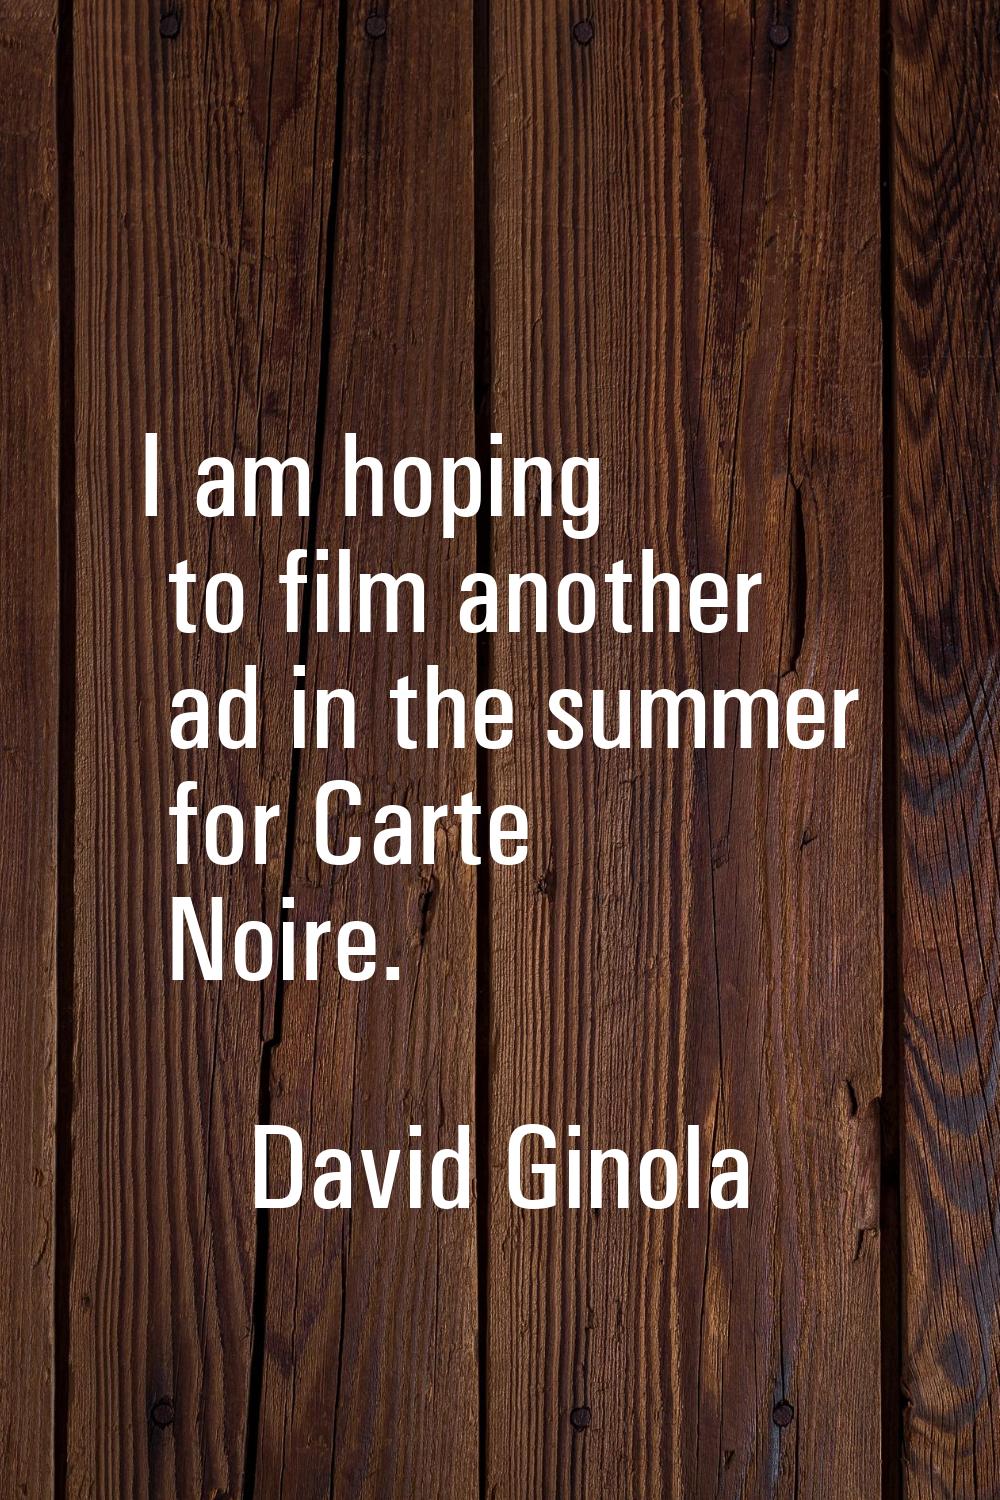 I am hoping to film another ad in the summer for Carte Noire.